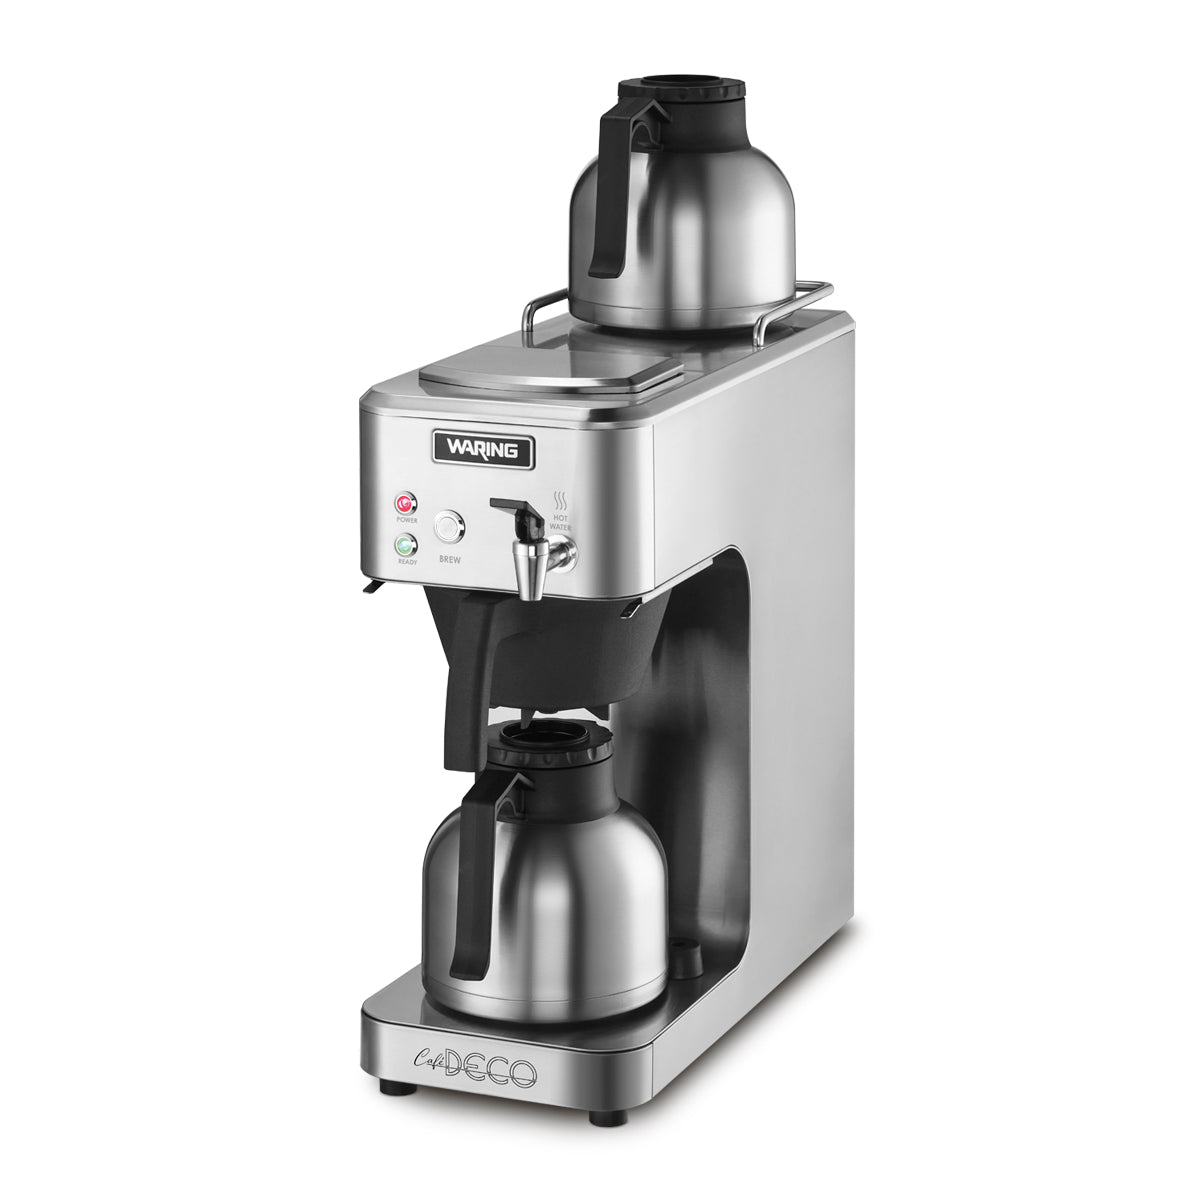 WCM60PT "Café Deco" Thermal Coffee Brewer with Hot Water Faucet by Waring Commercial